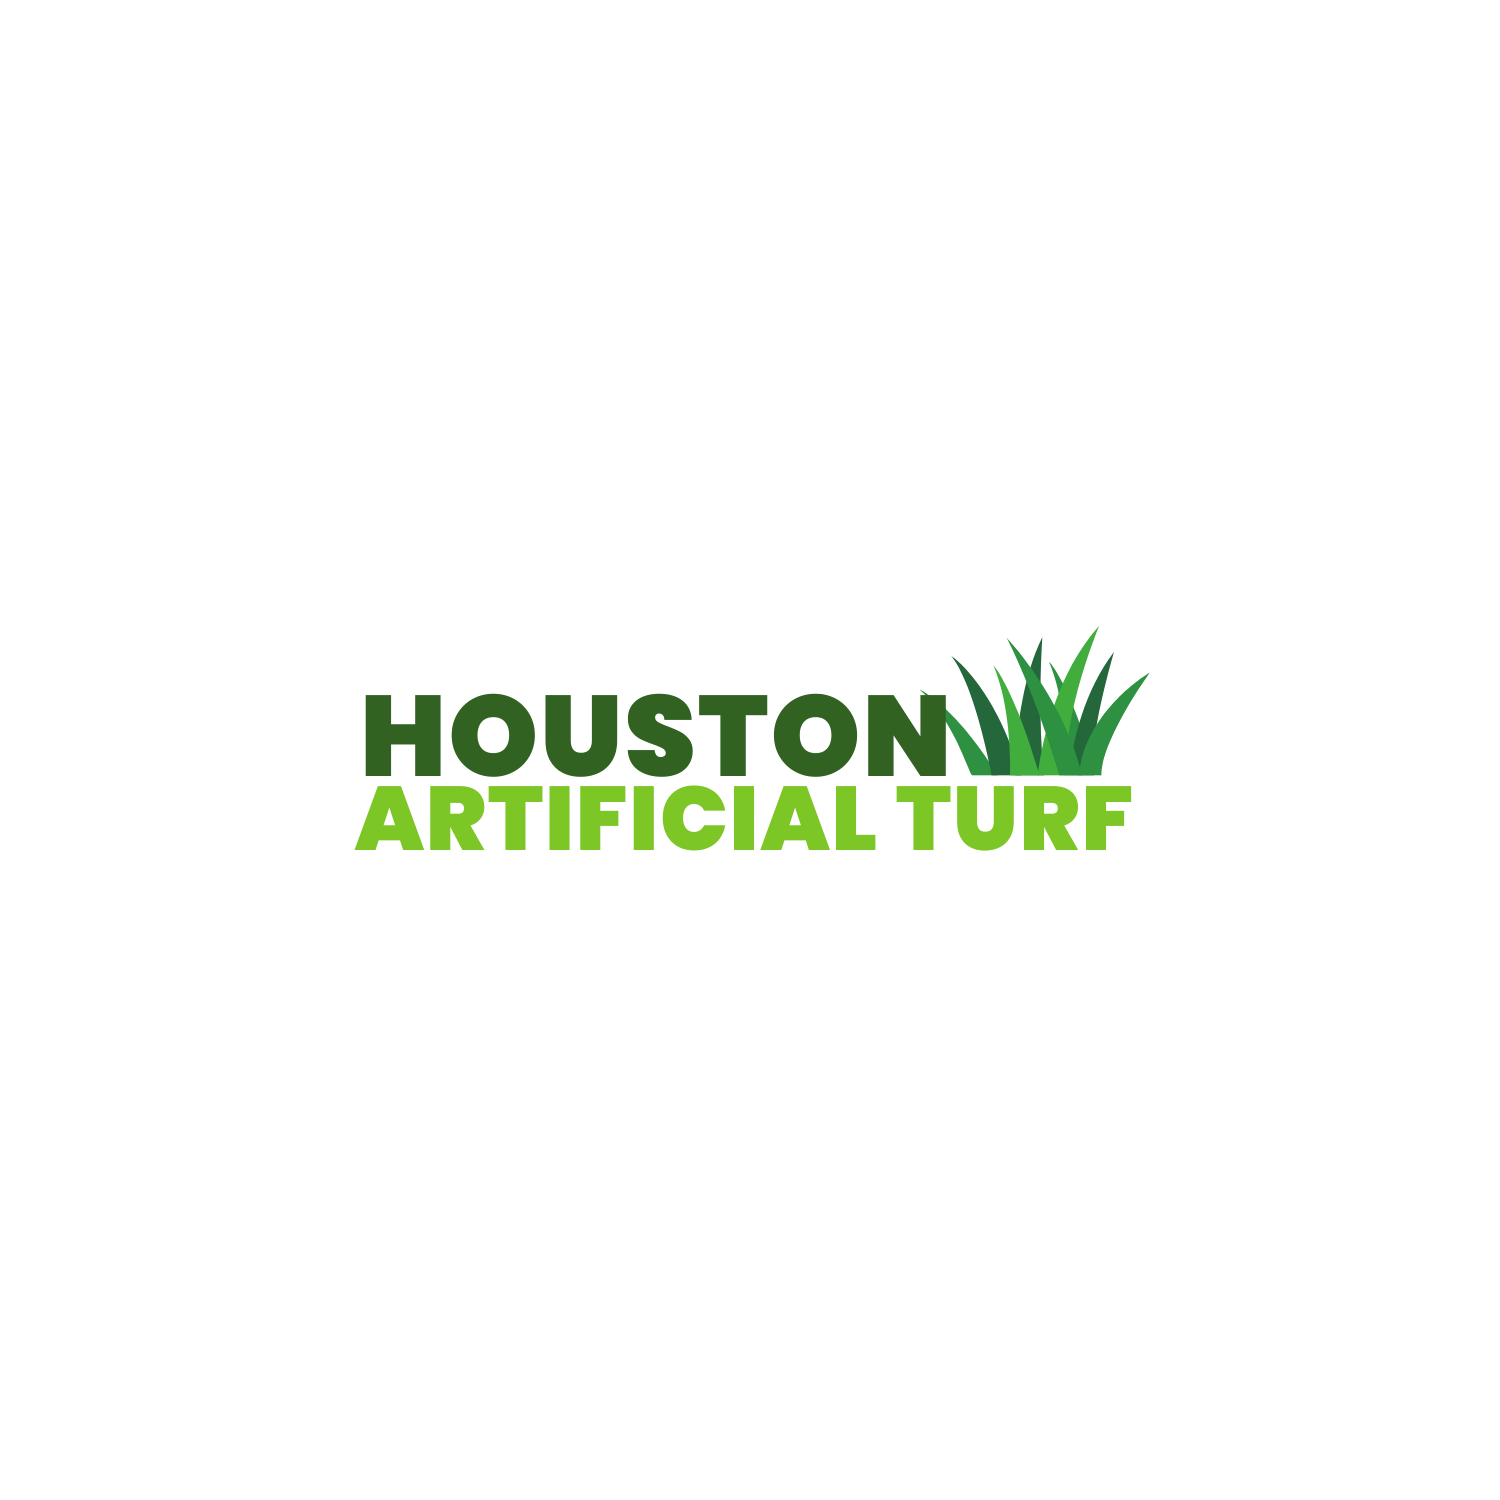 Houston-Artificial-Turf-Logo-Square.png